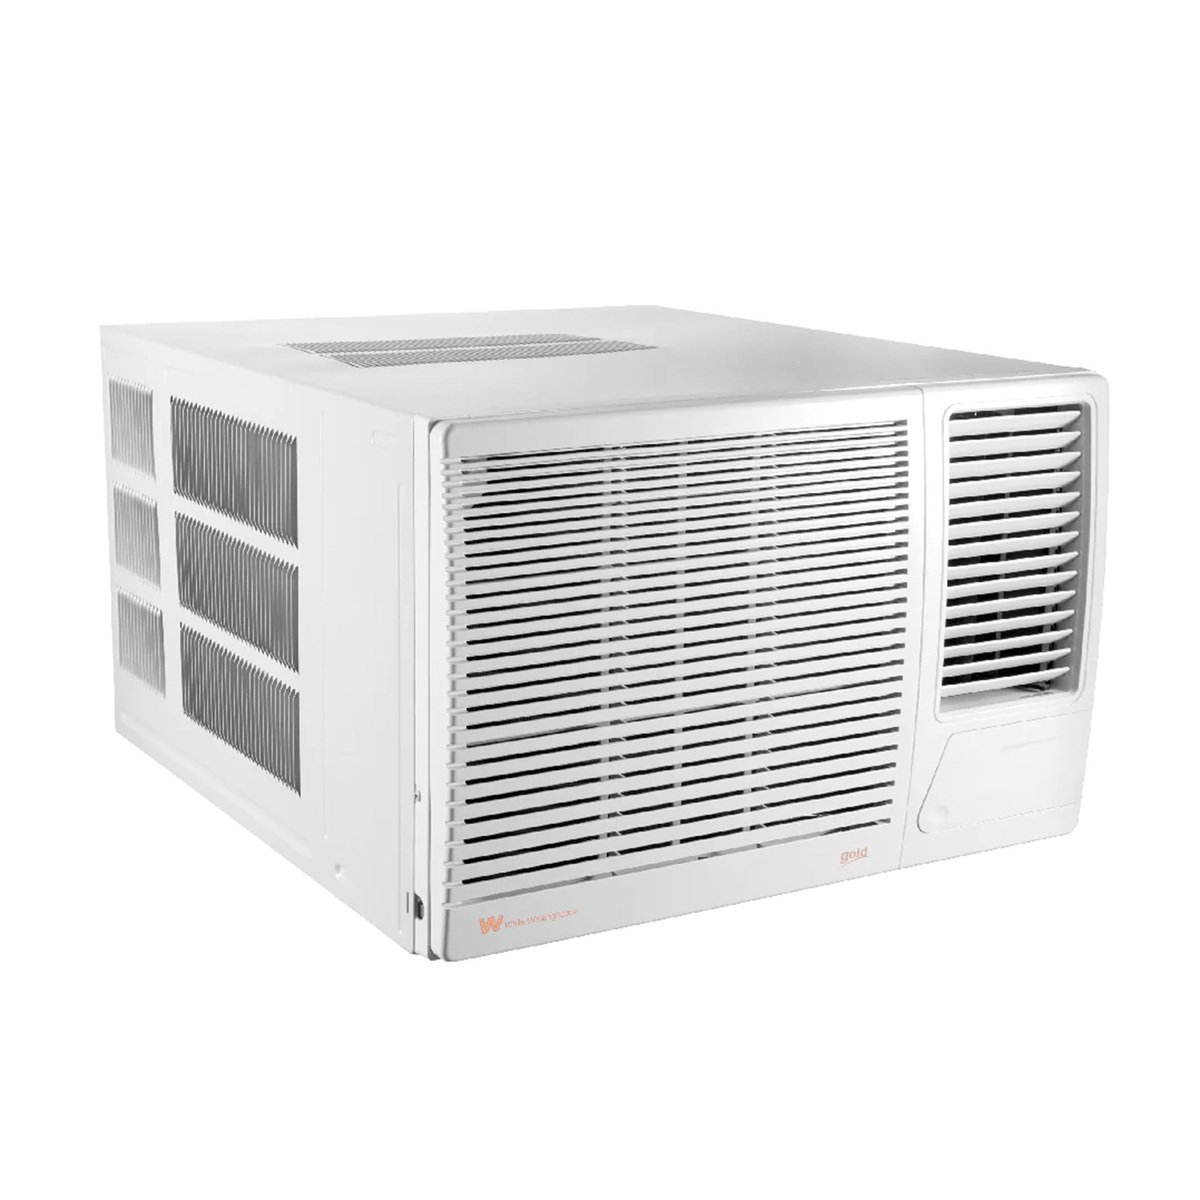 White Westing House Window Air Conditioner WWA20G9R 1.5Ton Cool Only